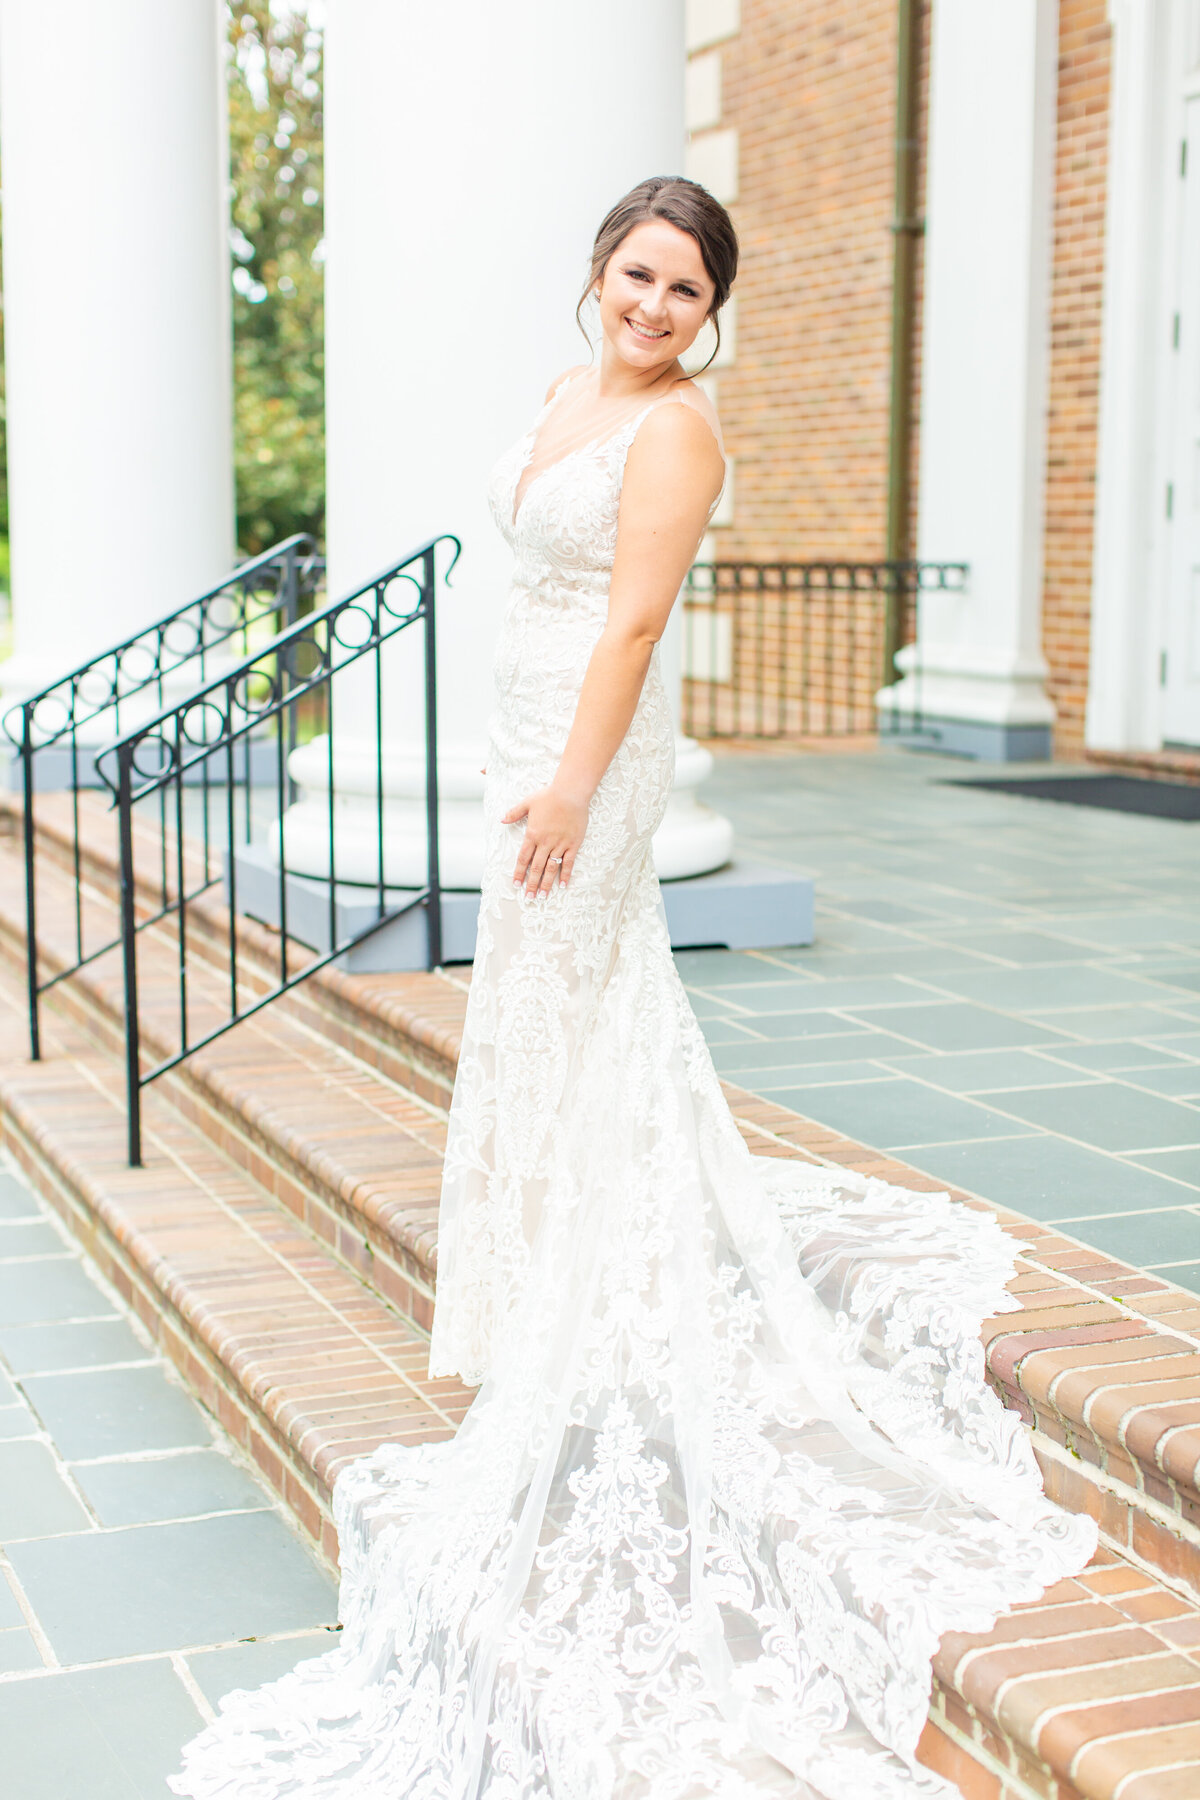 Taylor Main Photography is a wedding photographer based in Raleigh North Carolina serving North Carolina, Virginia and Beyond Brides and Grooms